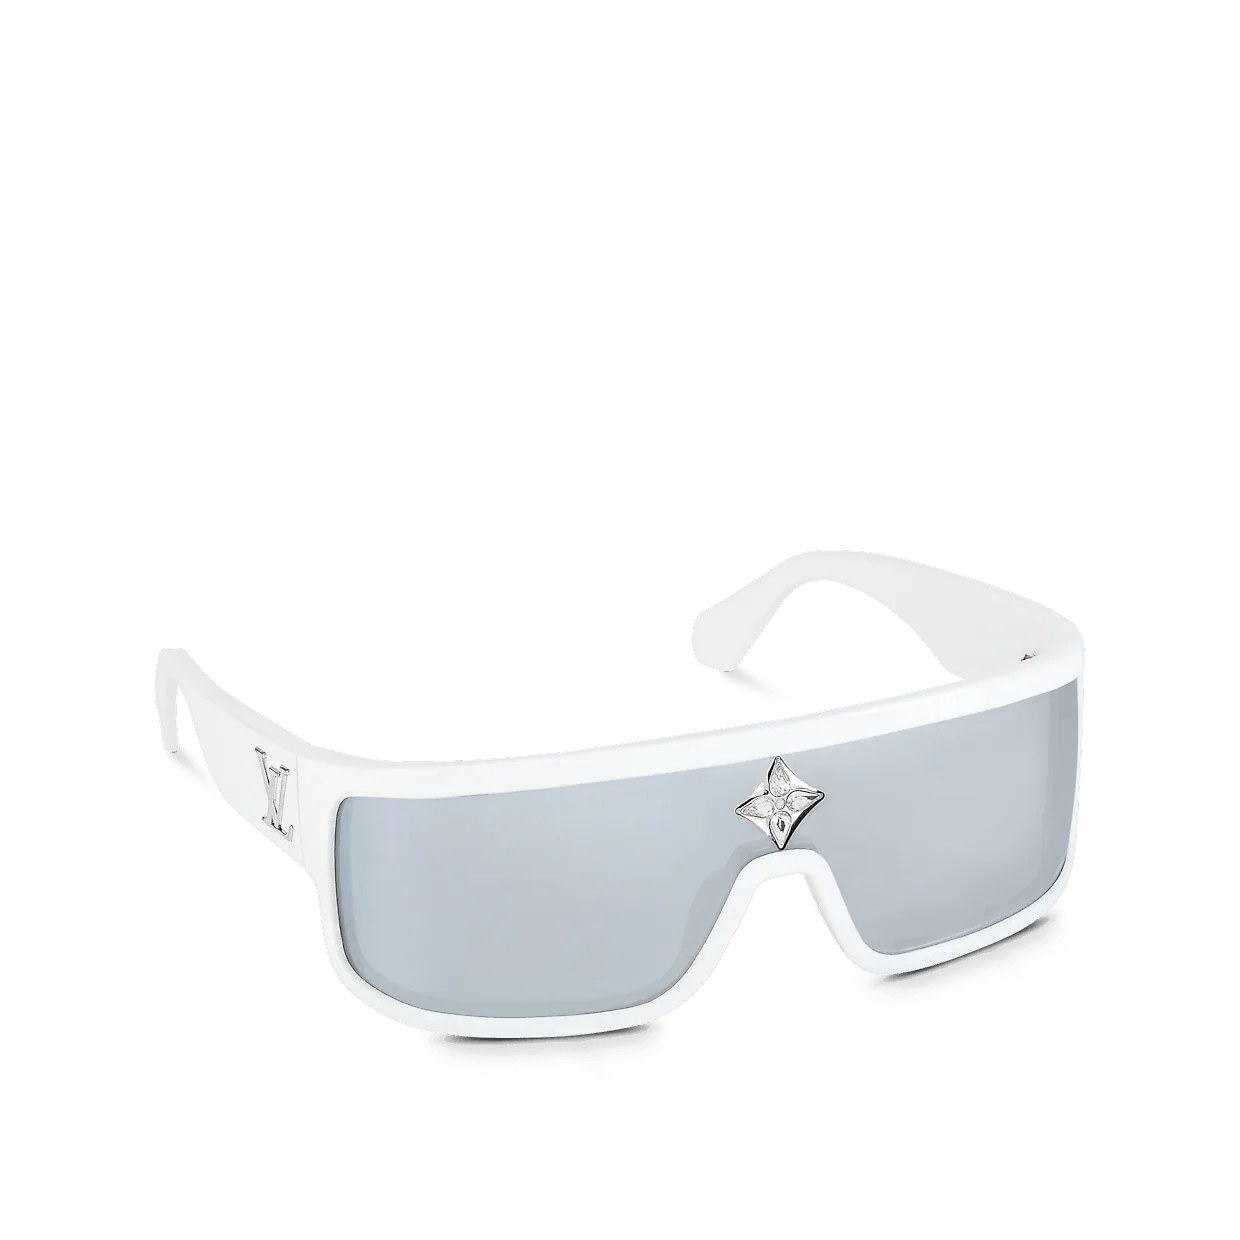 looking for Louis vuttion “cyclops sport mask sunglasses” anyone